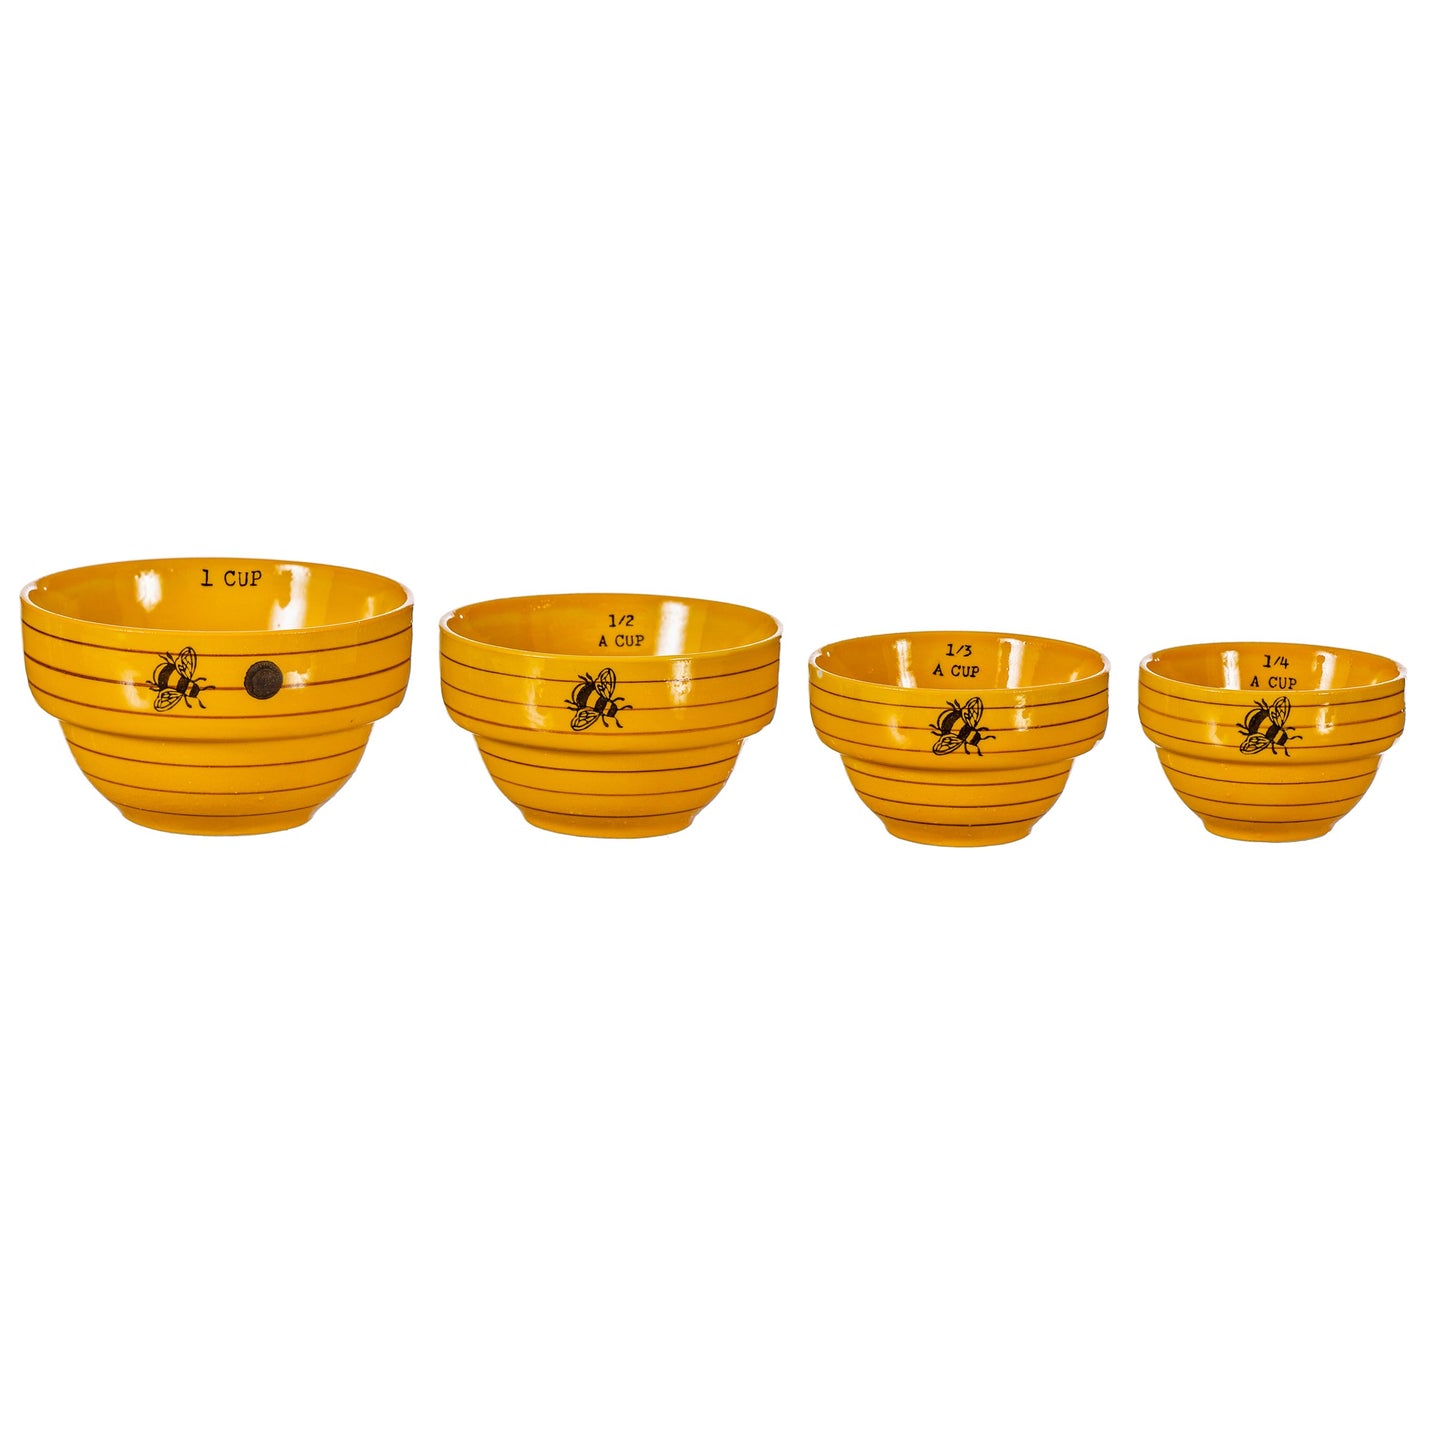 Bee Hive Measuring Cups